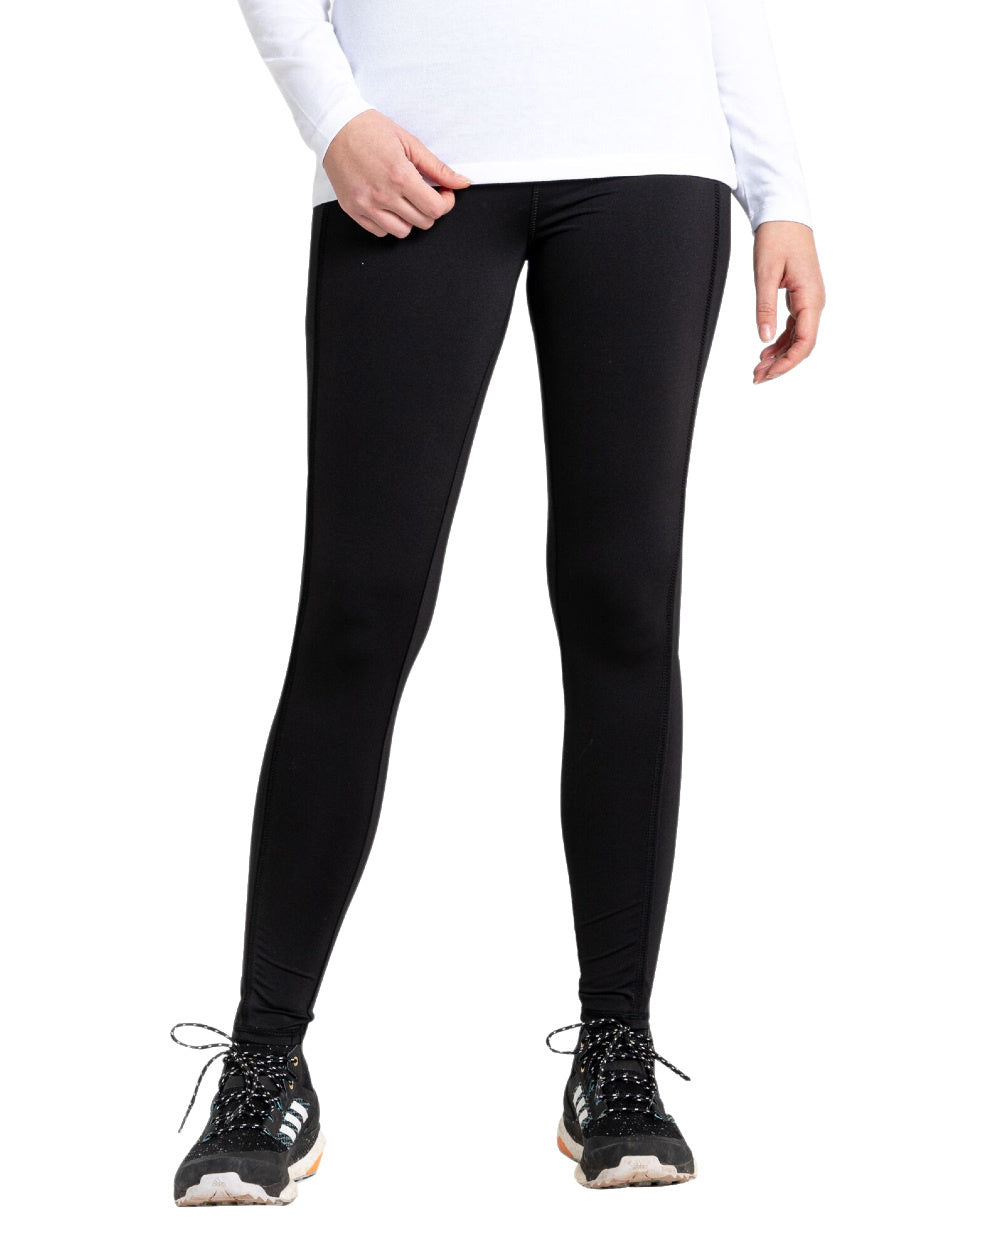 Black Coloured Craghoppers Womens NosiLife Durrel Leggings On A White Background 